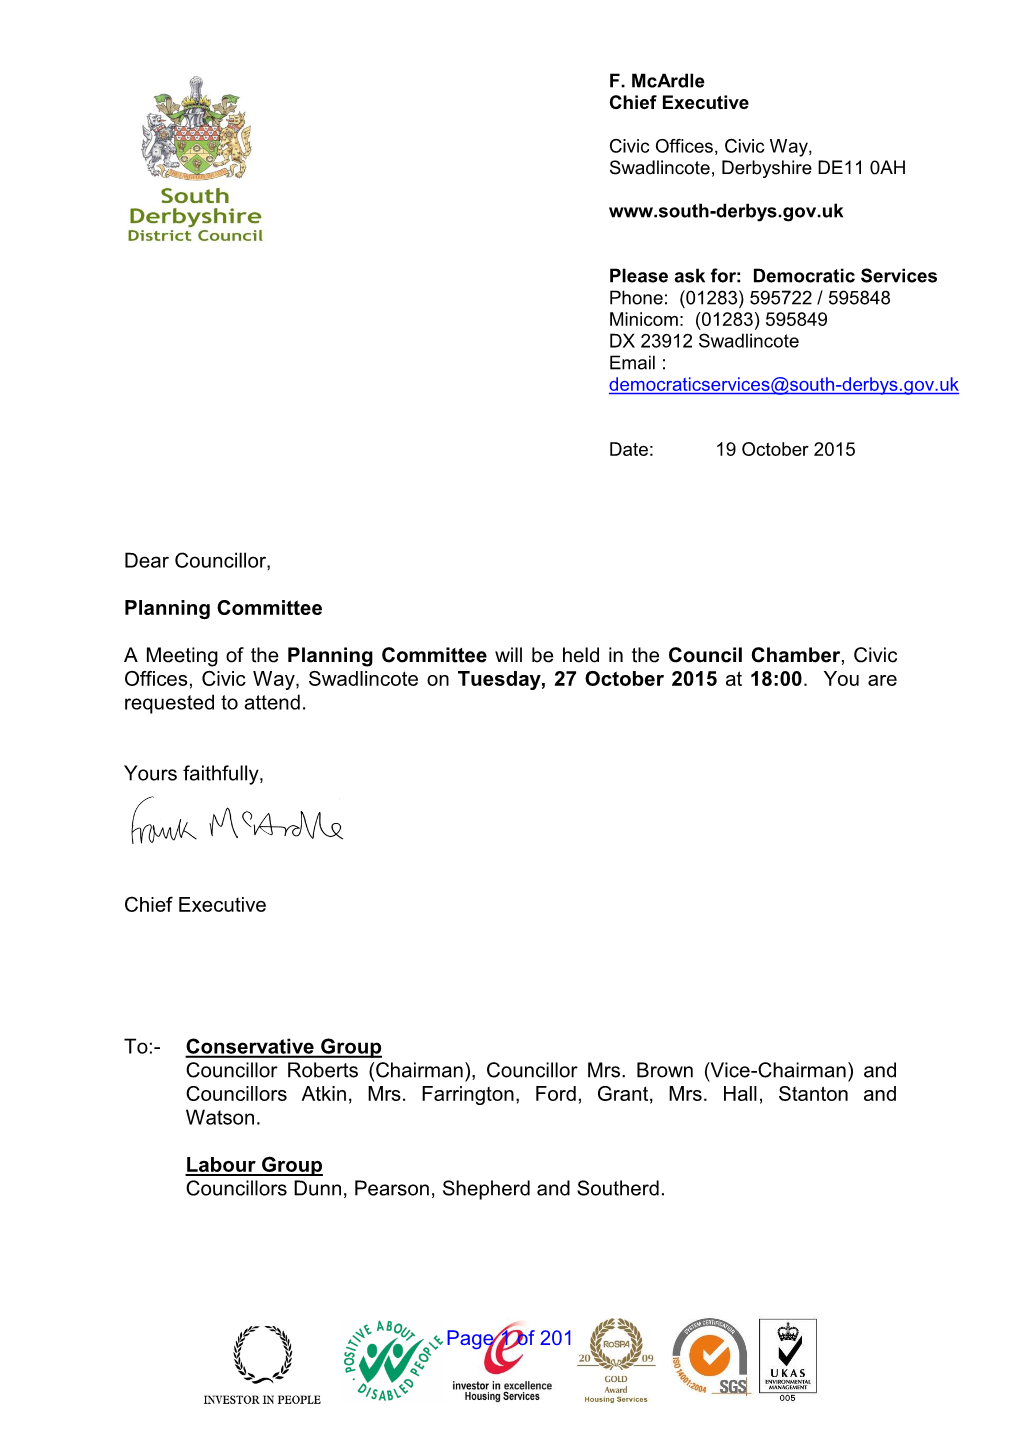 Dear Councillor, Planning Committee a Meeting of the Planning Committee Will Be Held in the Council Chamber, Civic Offices, Civi